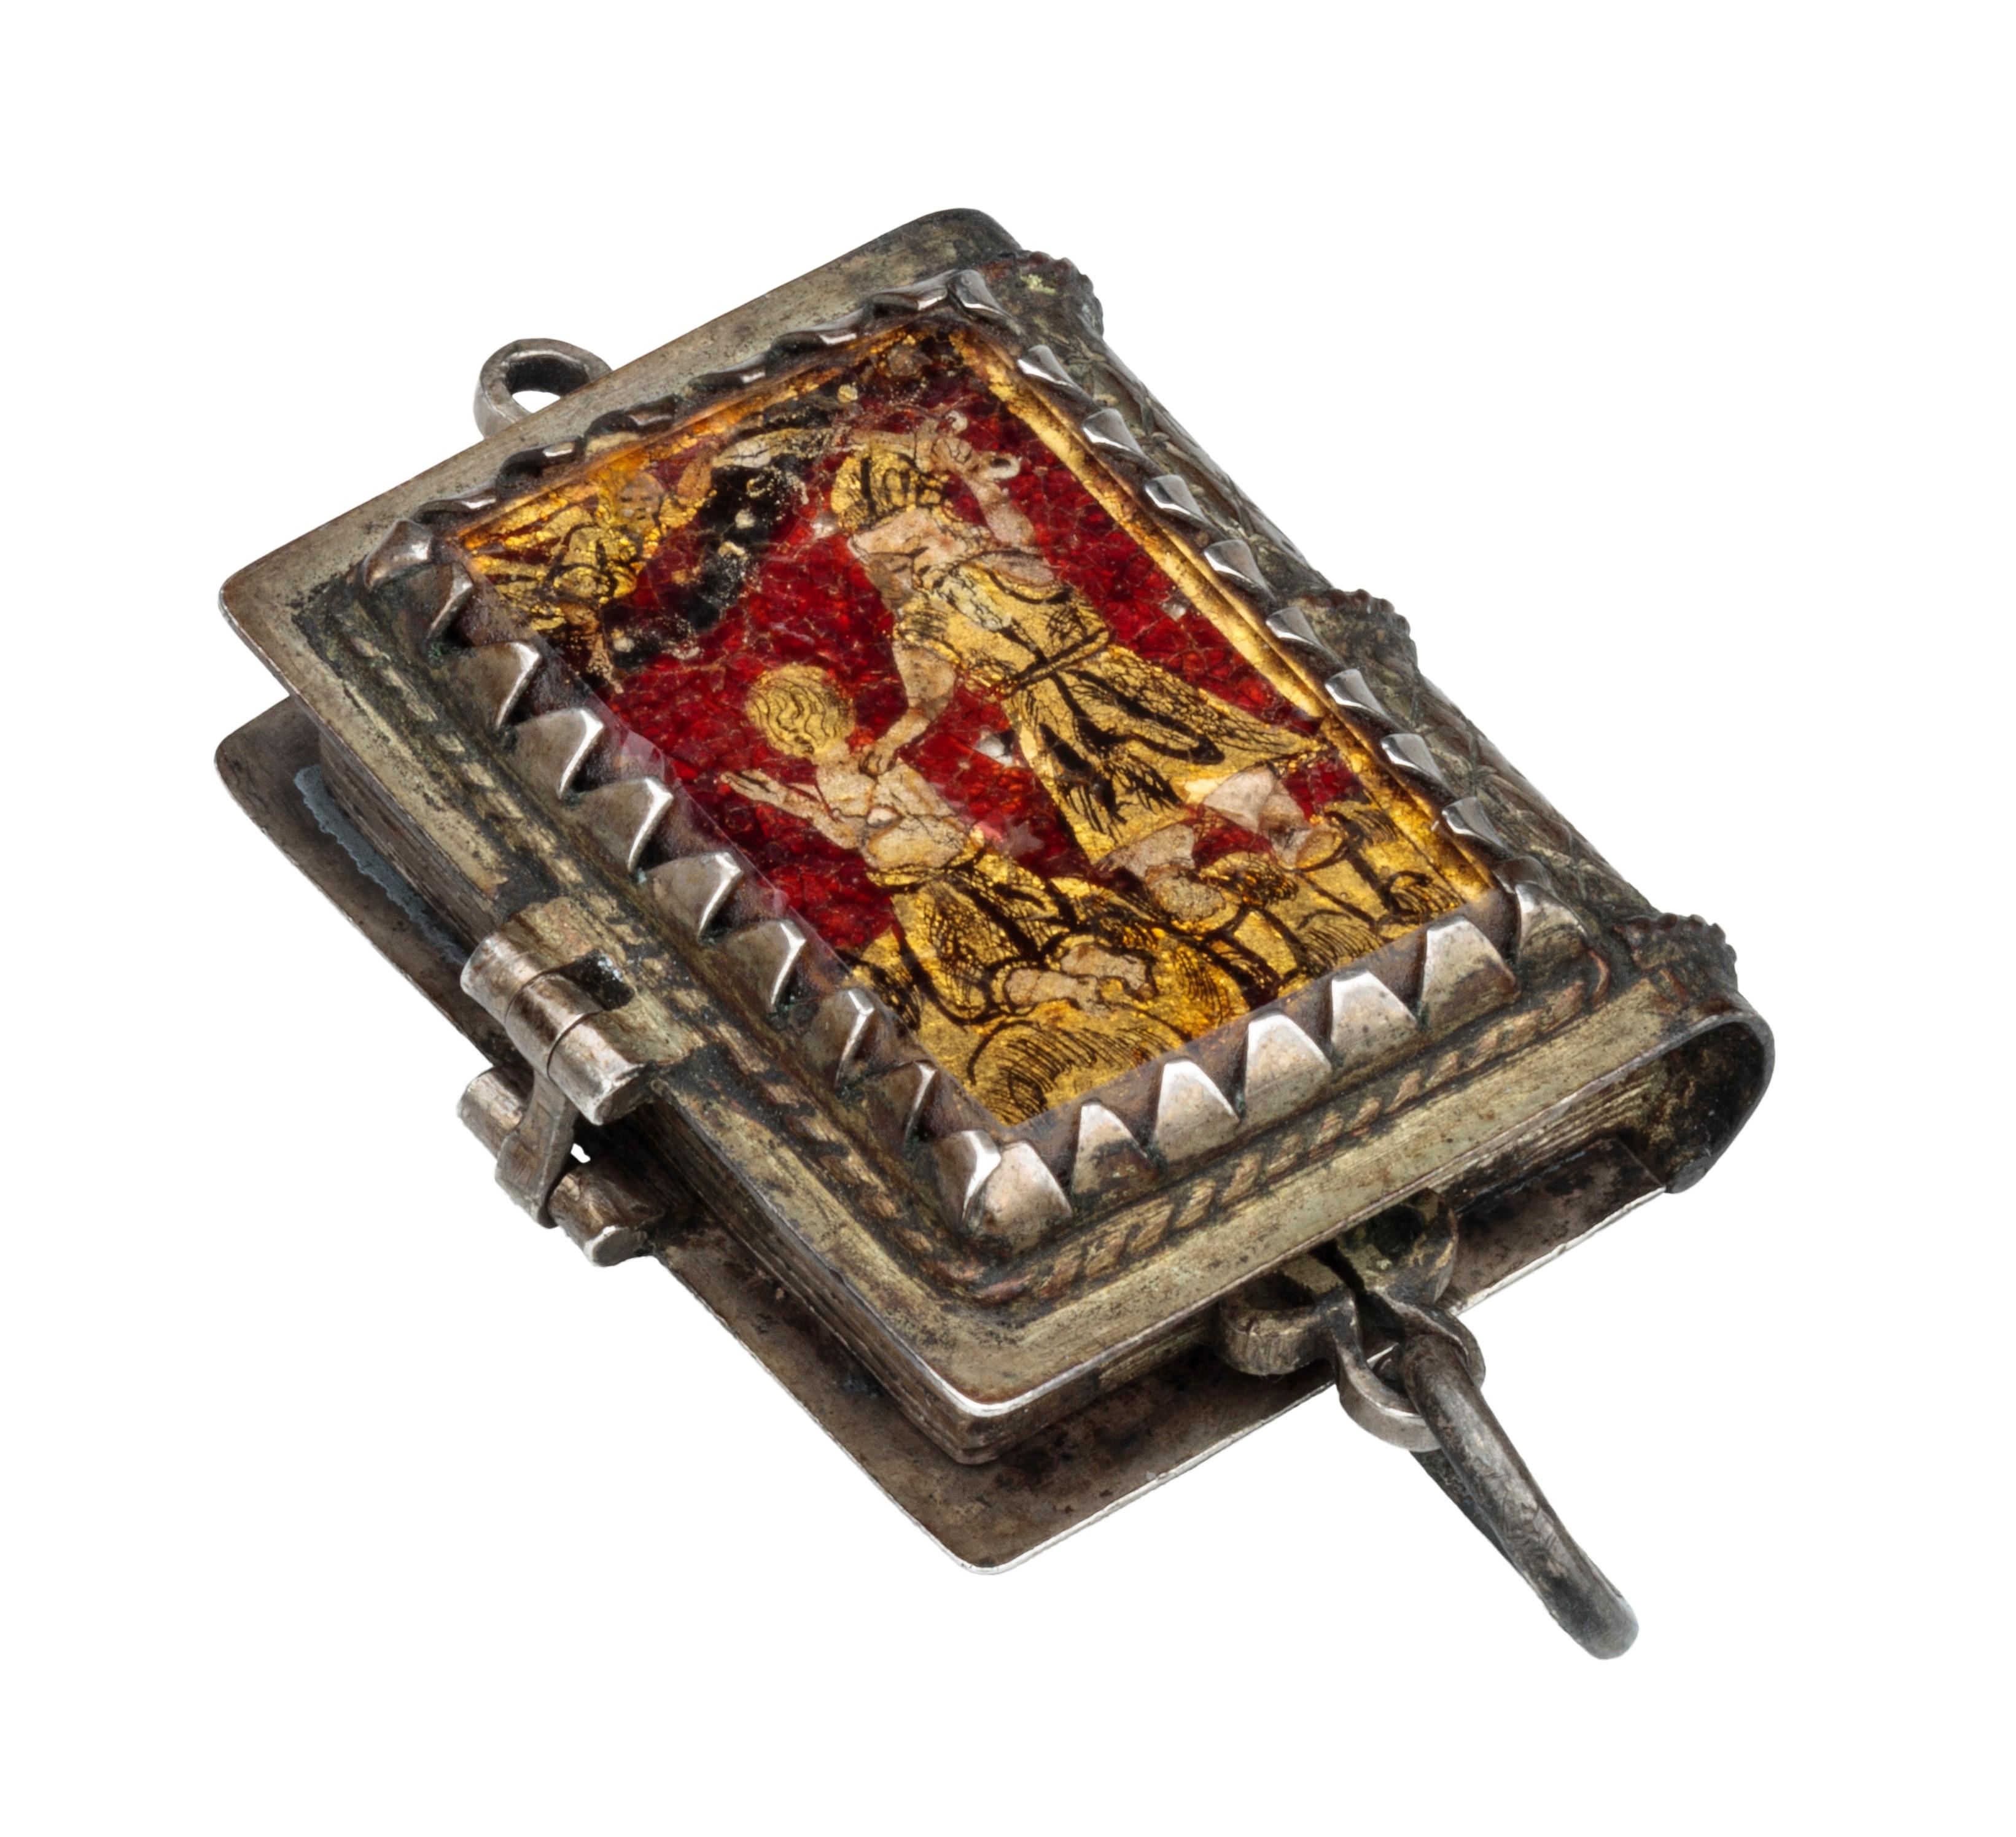 RELIQUARY PENDANT IN BOOK FORM 
Probably southern Germany, 1630–40 
Gilded silver, verre églomisé 
Weight 13.2 grams; dimensions 42 × 25 × 12 mm; opens to 40 mm 

Gilded silver pendant in book form with hinged, lid, corded wire surround, and